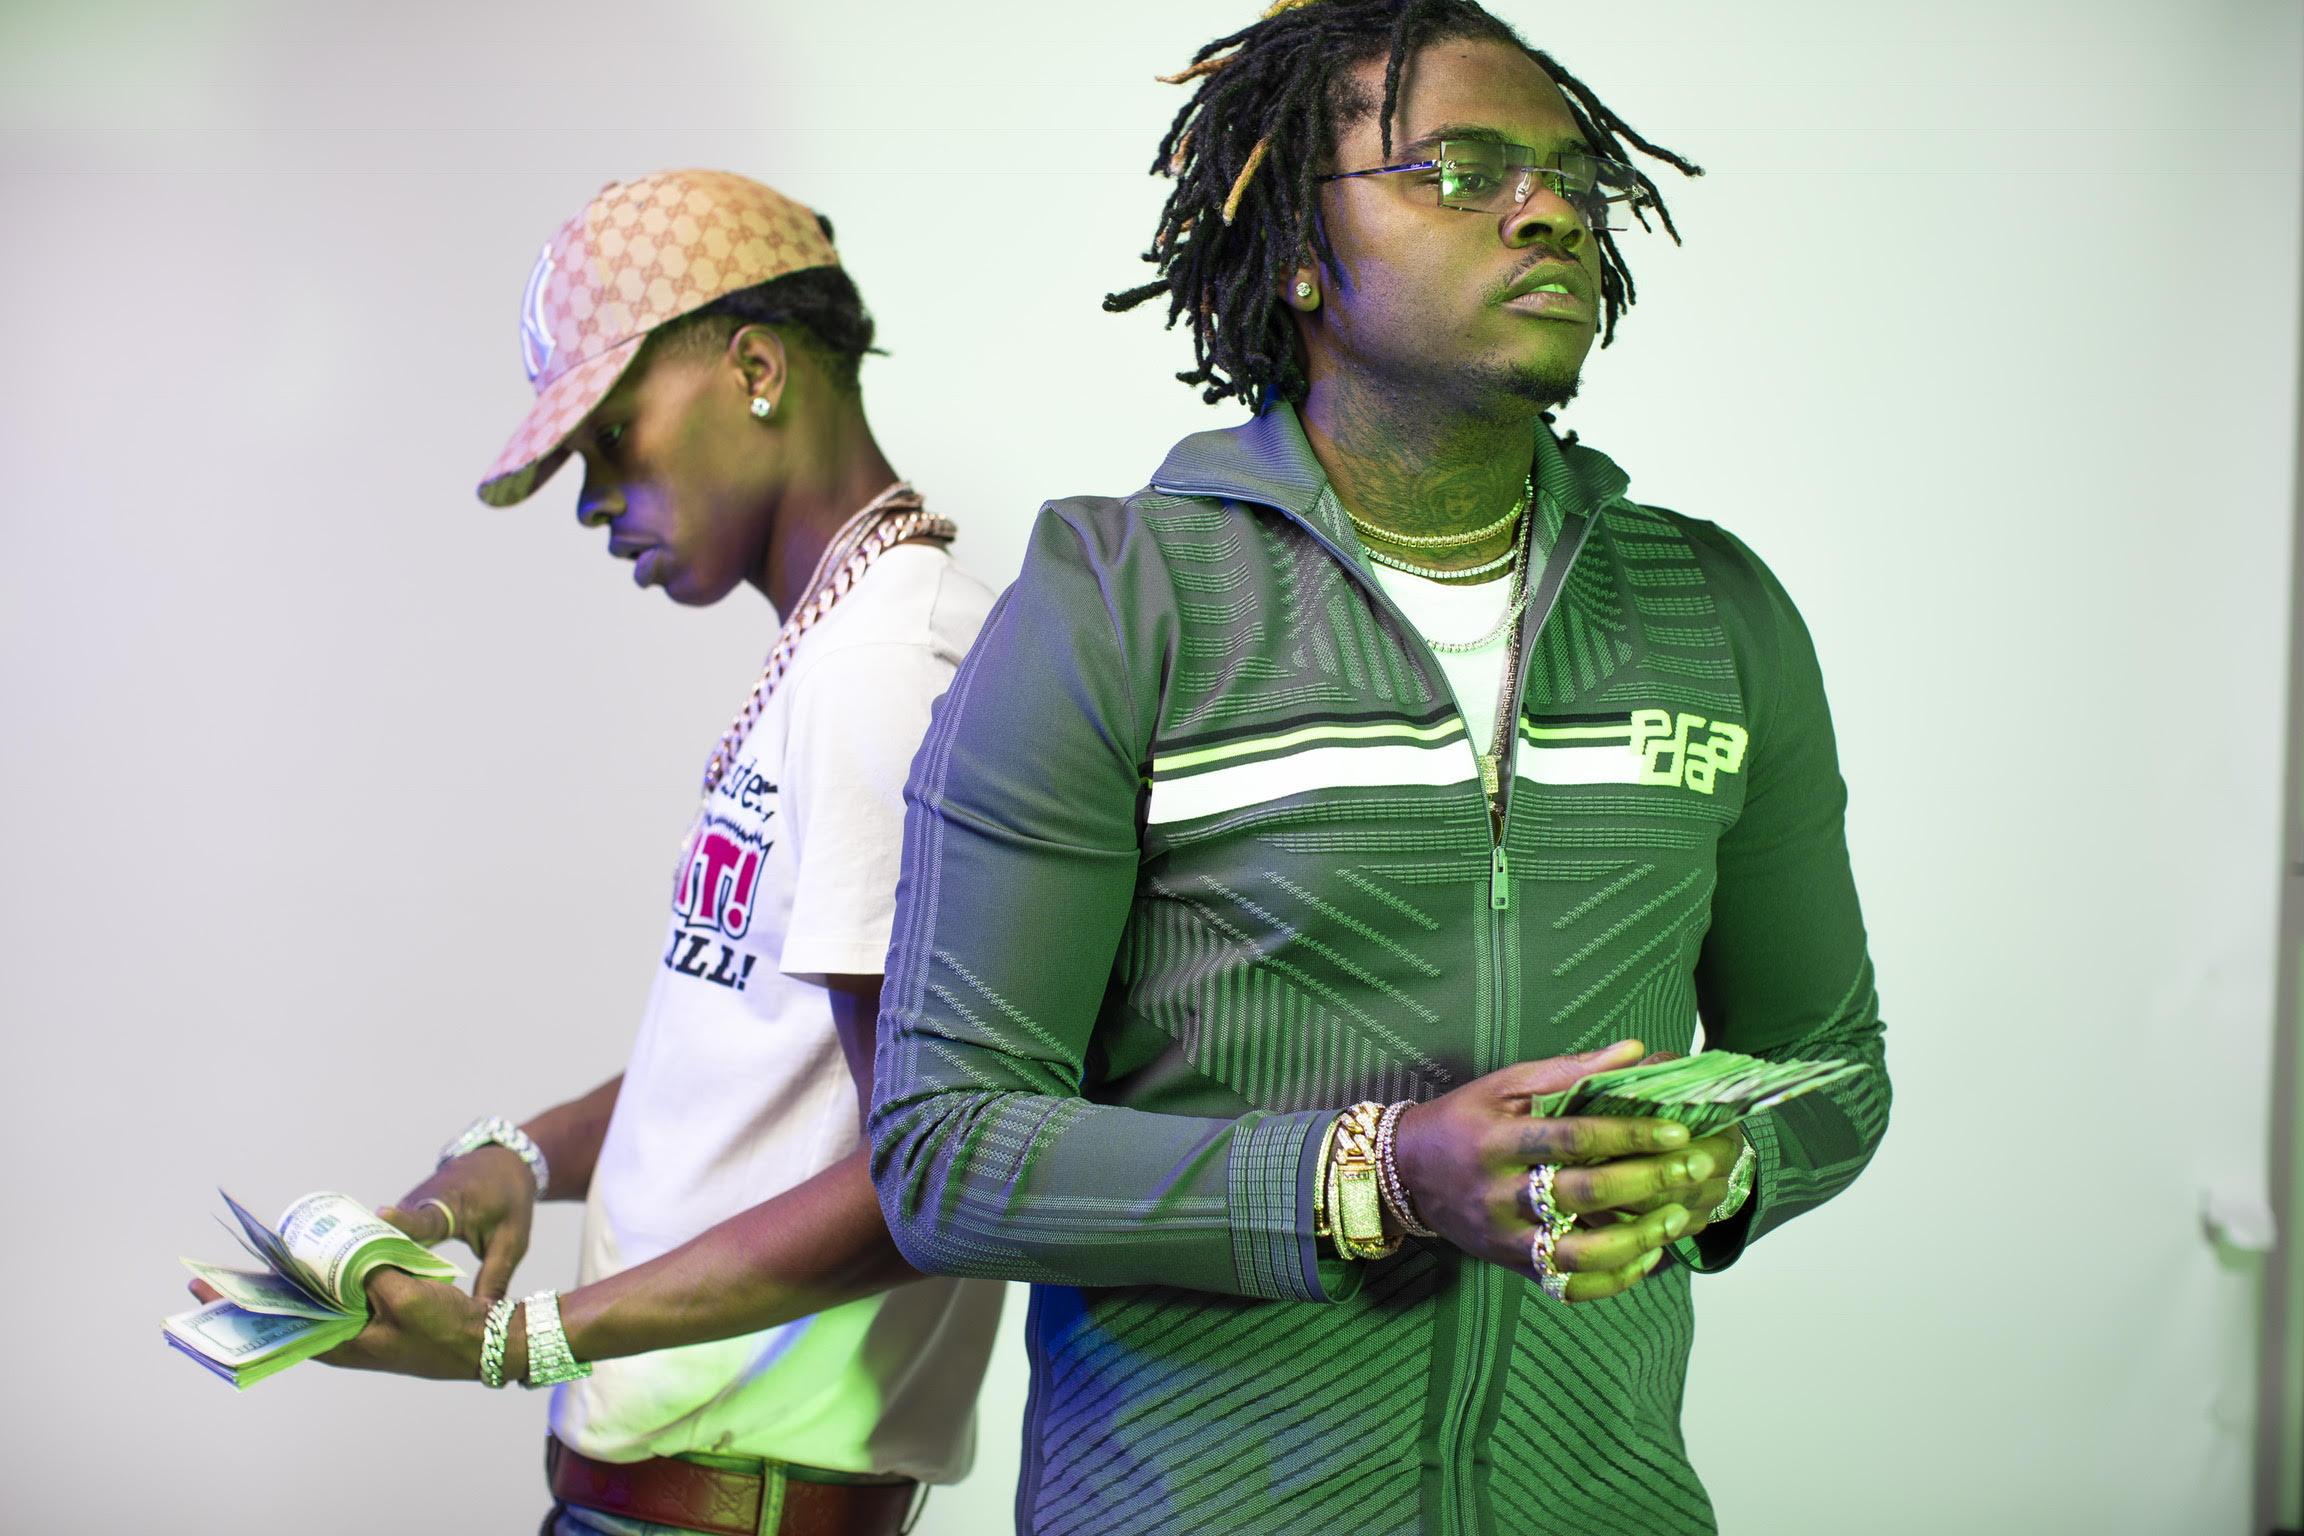 Gunna Taught Lil Baby How to Rap. Now, They're the Best Duo